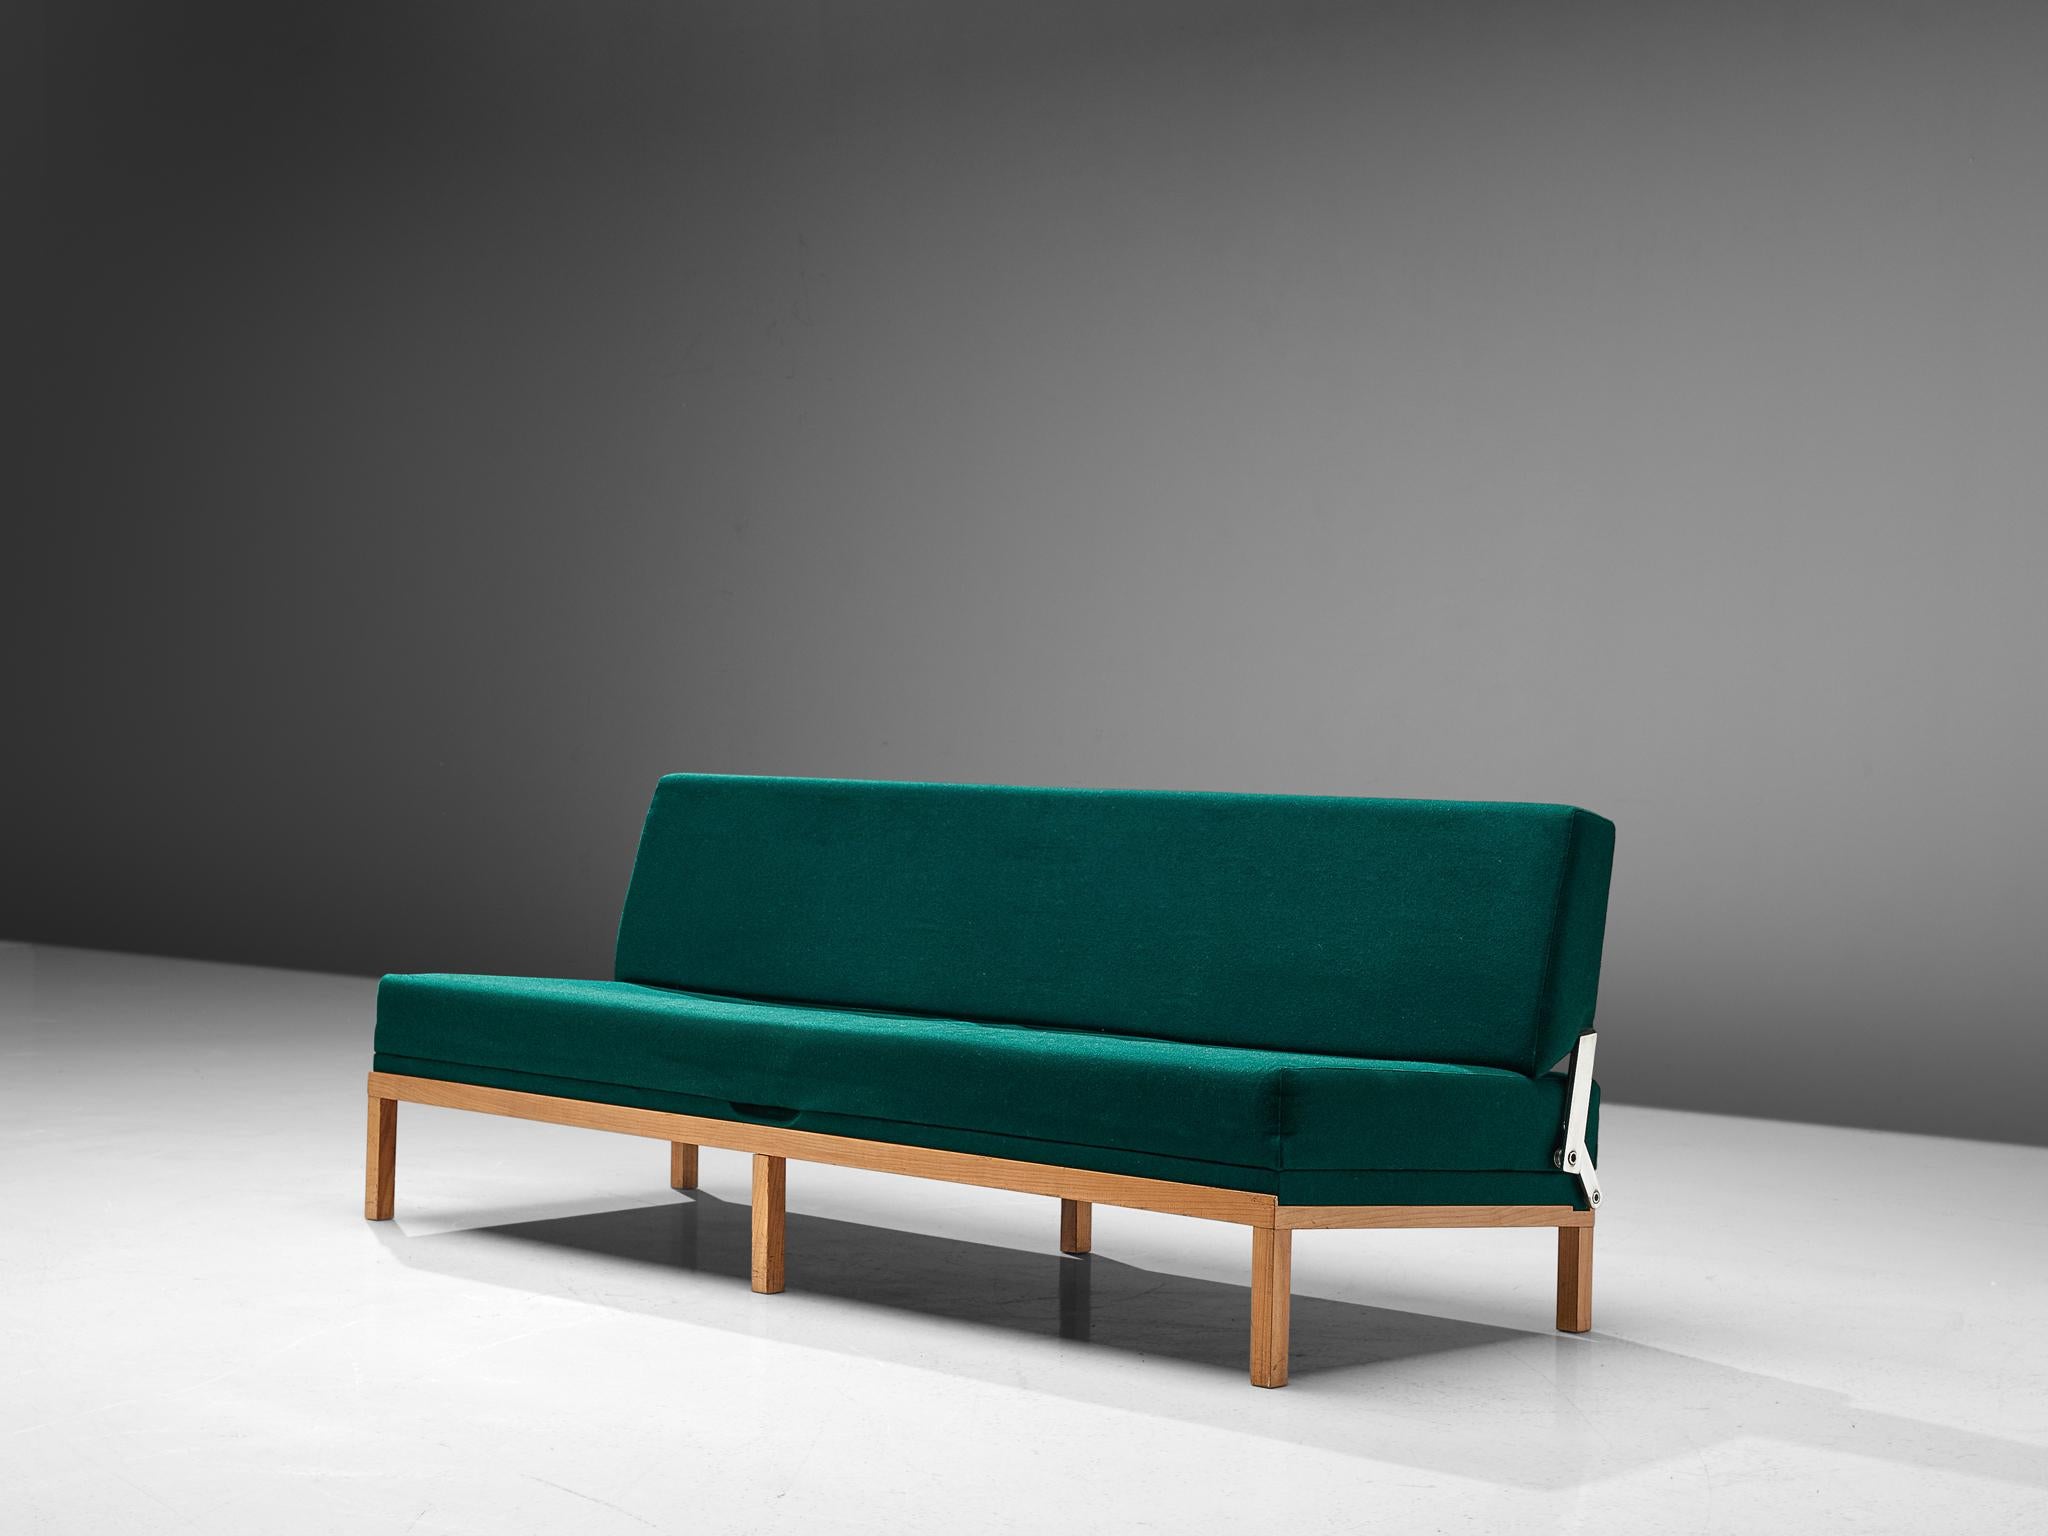 Johannes Spalt for Wittmann, green fabric, teak, Austria, 1960s.

A beautiful sofa that transforms to a daybed designed by Johannes Spalt for Wittman in the 1960s. This daybed is named 'Constanze'. This early model, with teak frame and green